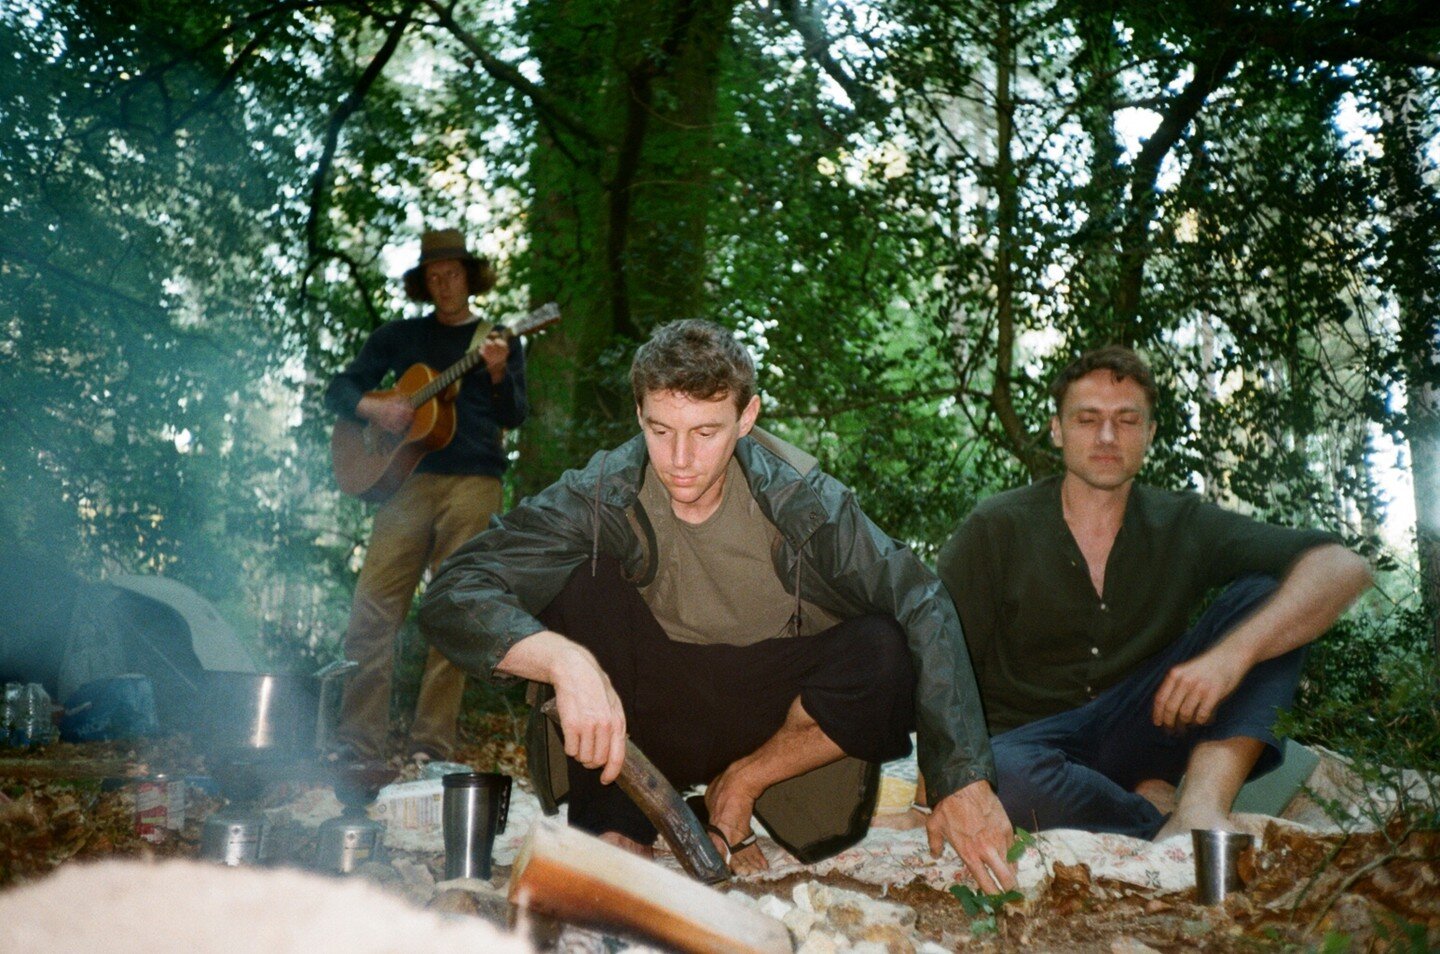 New Forest People.

Trees, horses, fire and blues. May '23.
(FujiFilm 200)

#bakedbeans #poachedeggs #tunafish #bluesguitar #horsesaddle